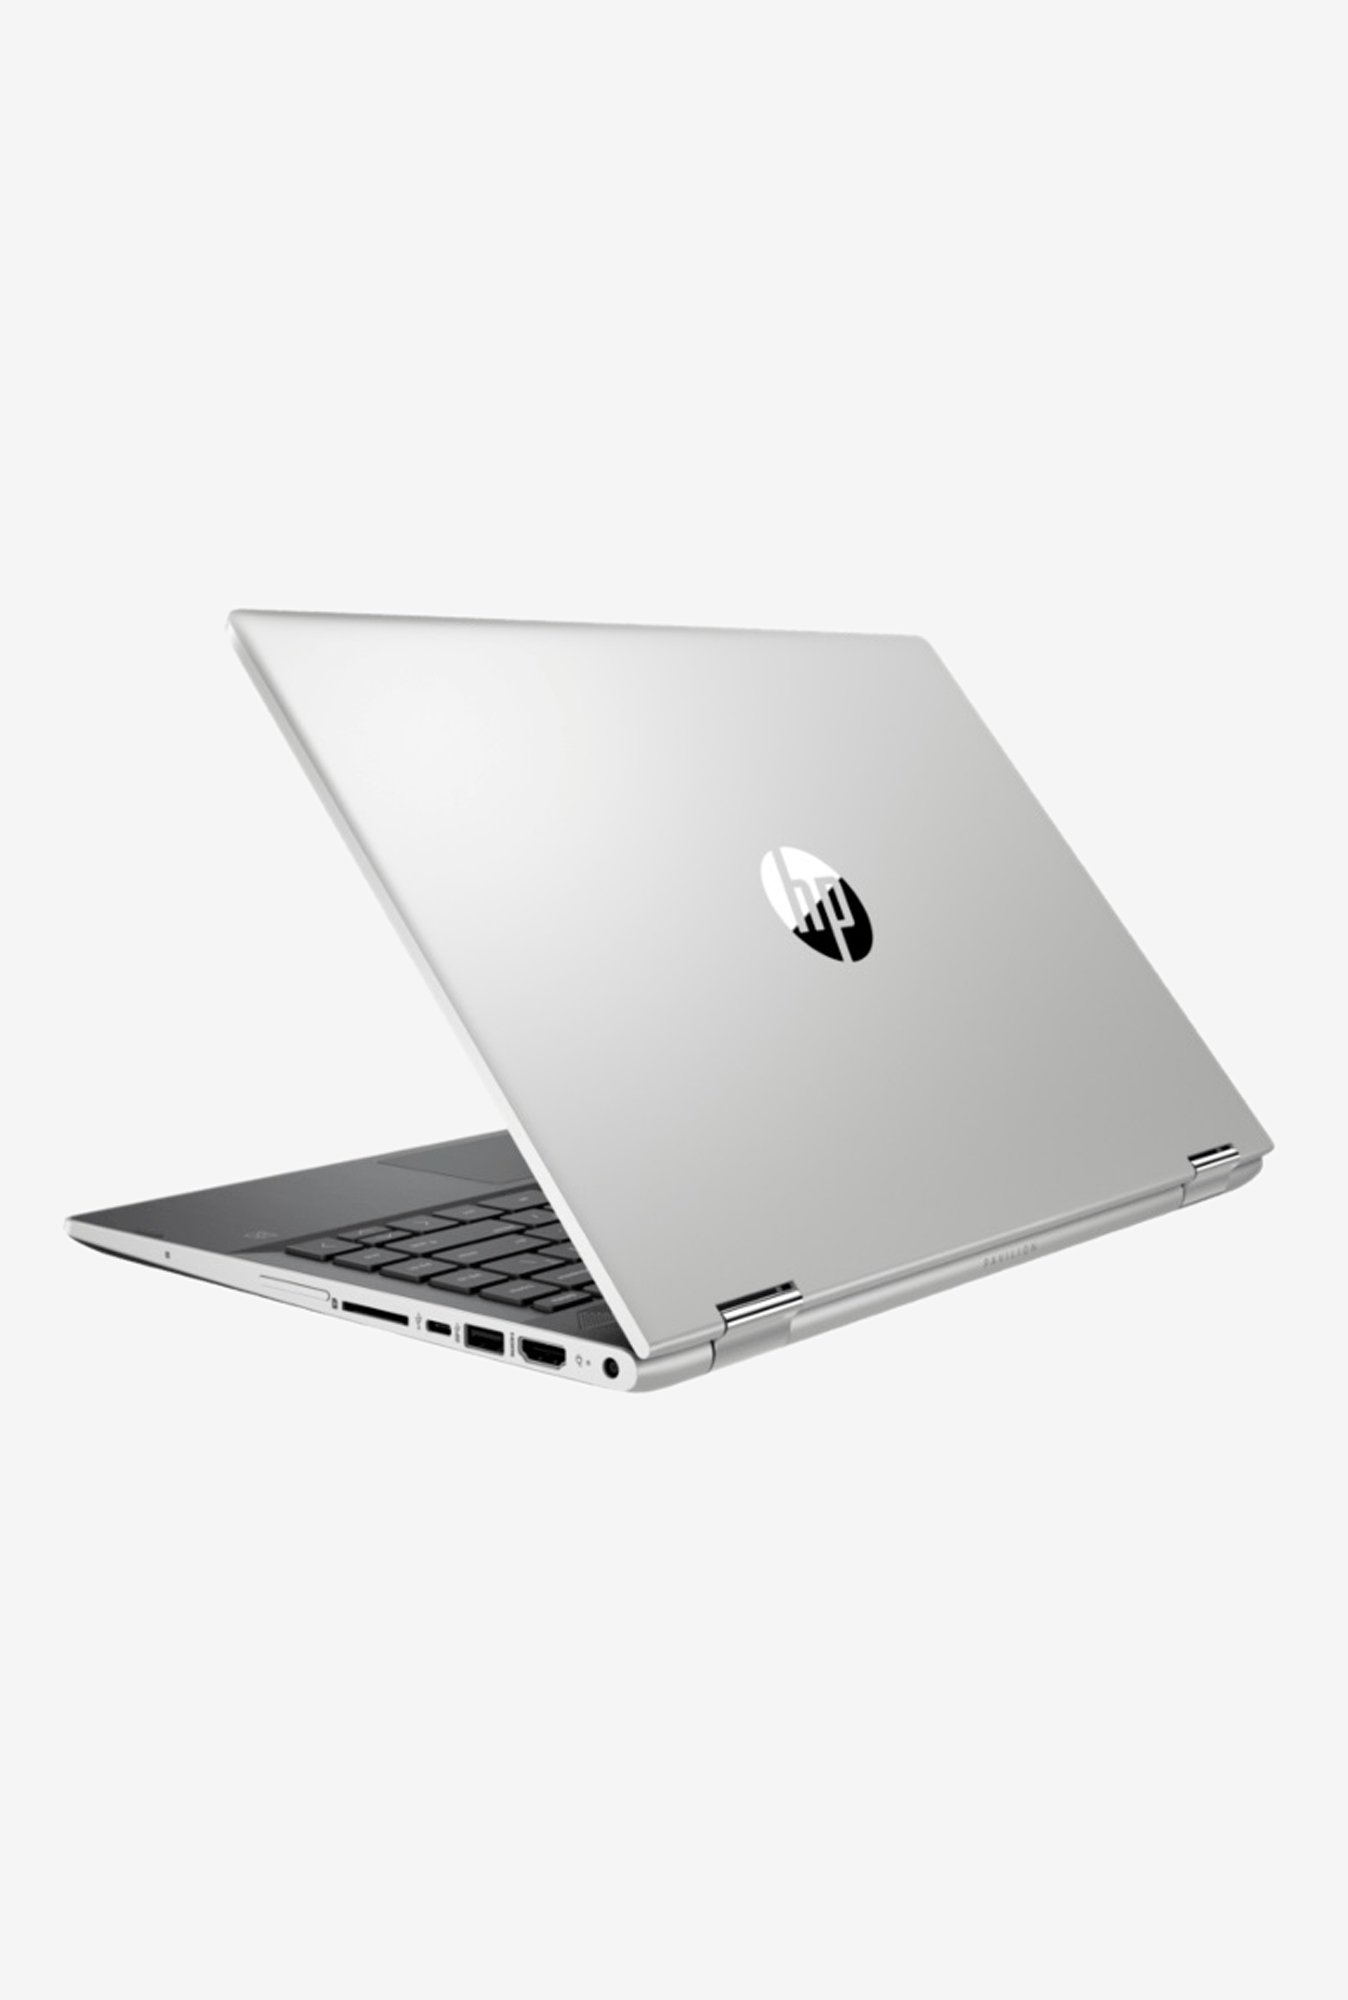 Hp Pavilion X360 14 Cd0077tu I3 8th Gen 4gb 1tb 8gb Ssd 35 56cm 14 Win10 Ms Office Int Silver